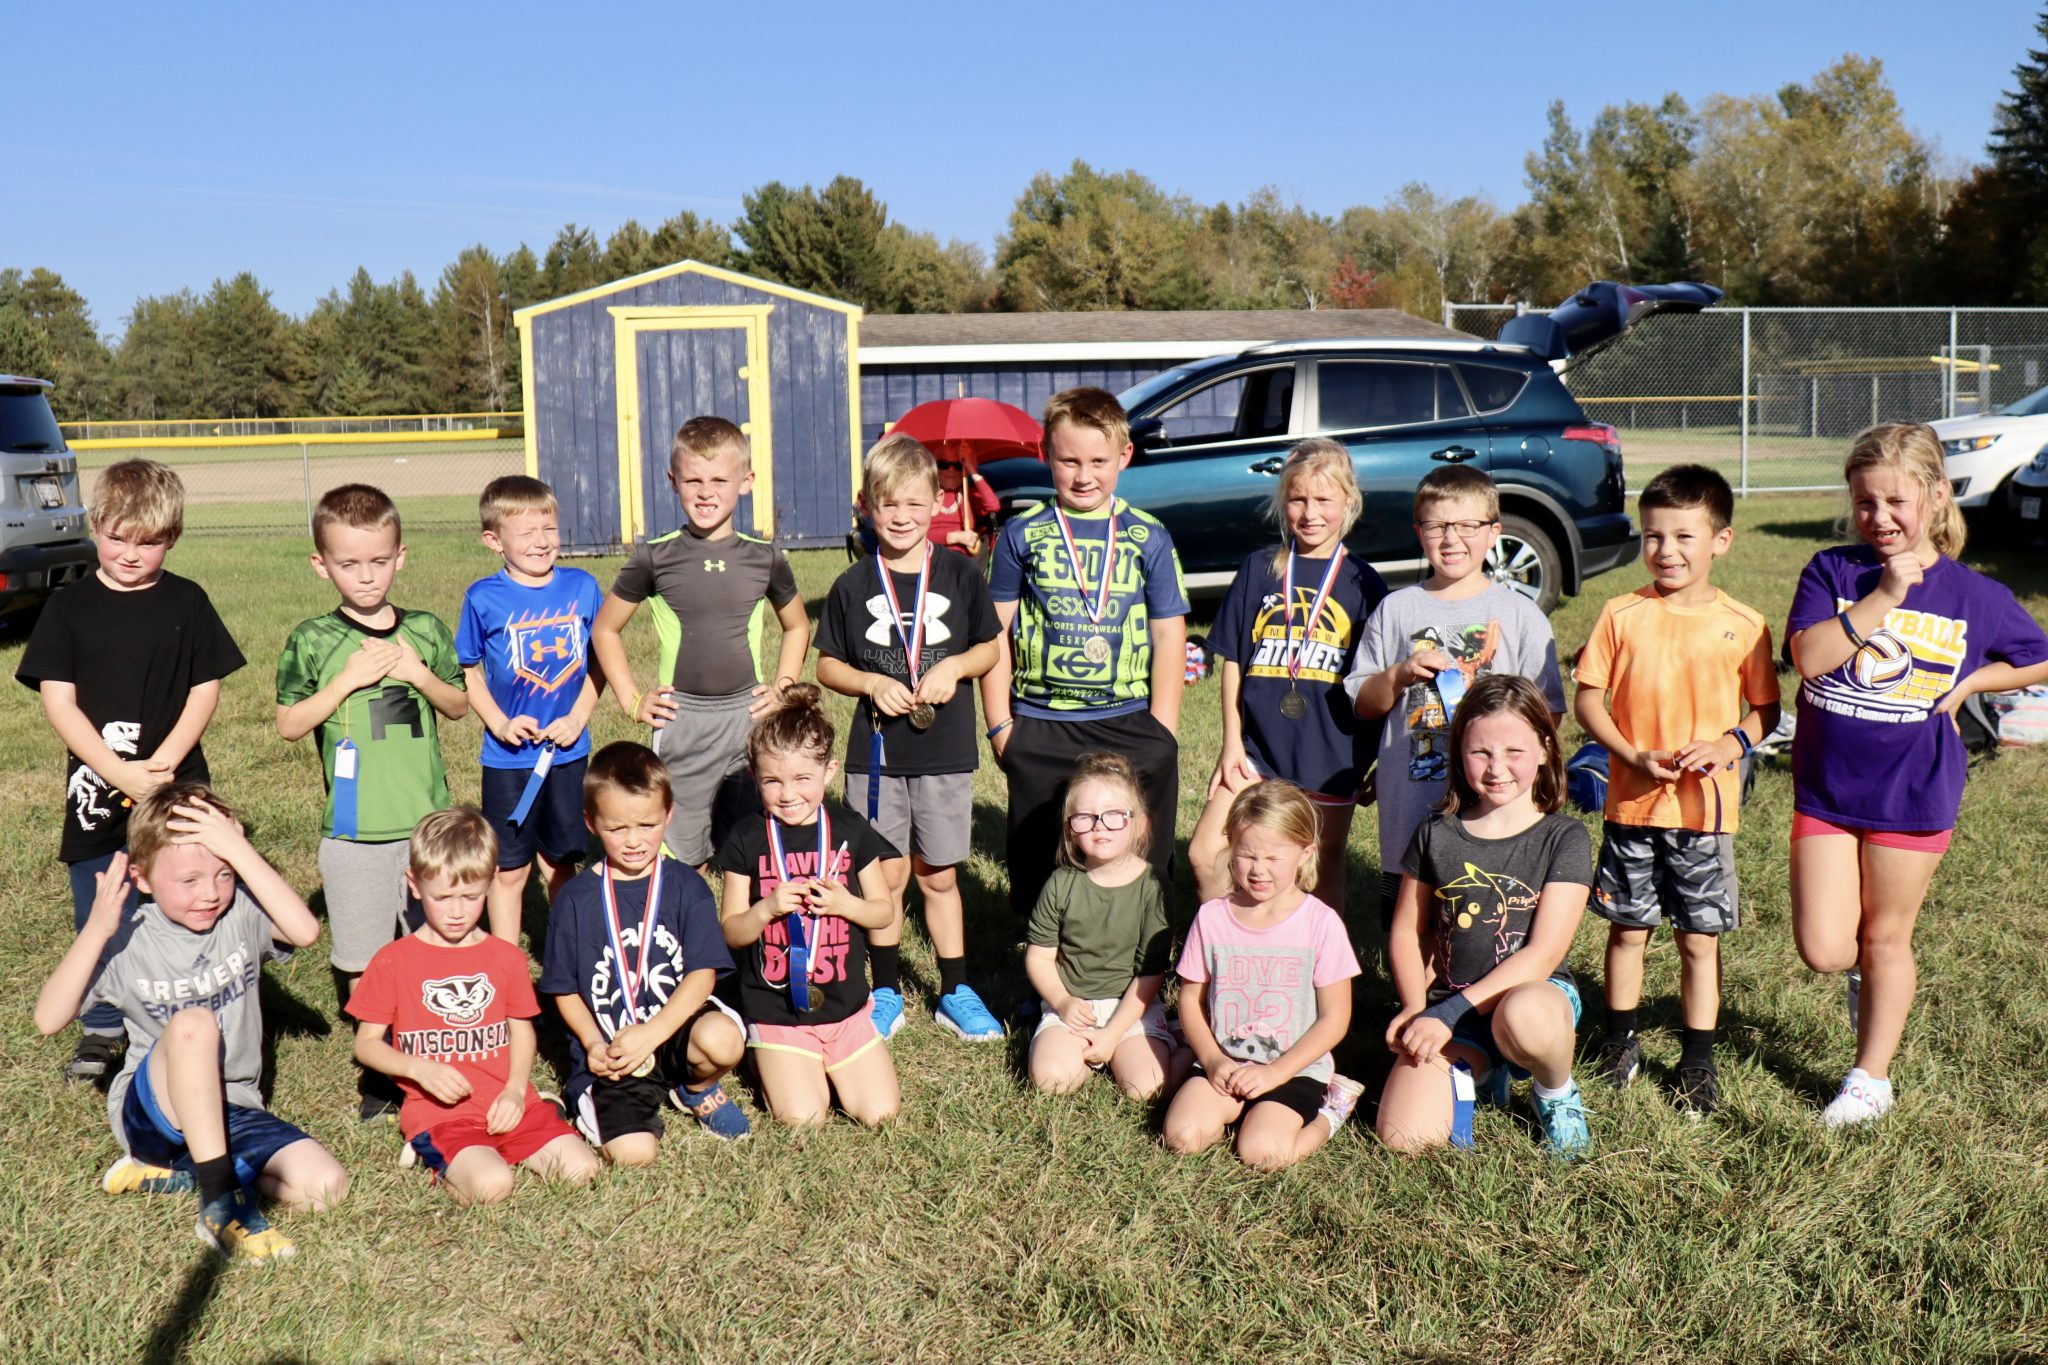 Little Hatchet Run Club carries on Homecoming week tradition with Fun Runs